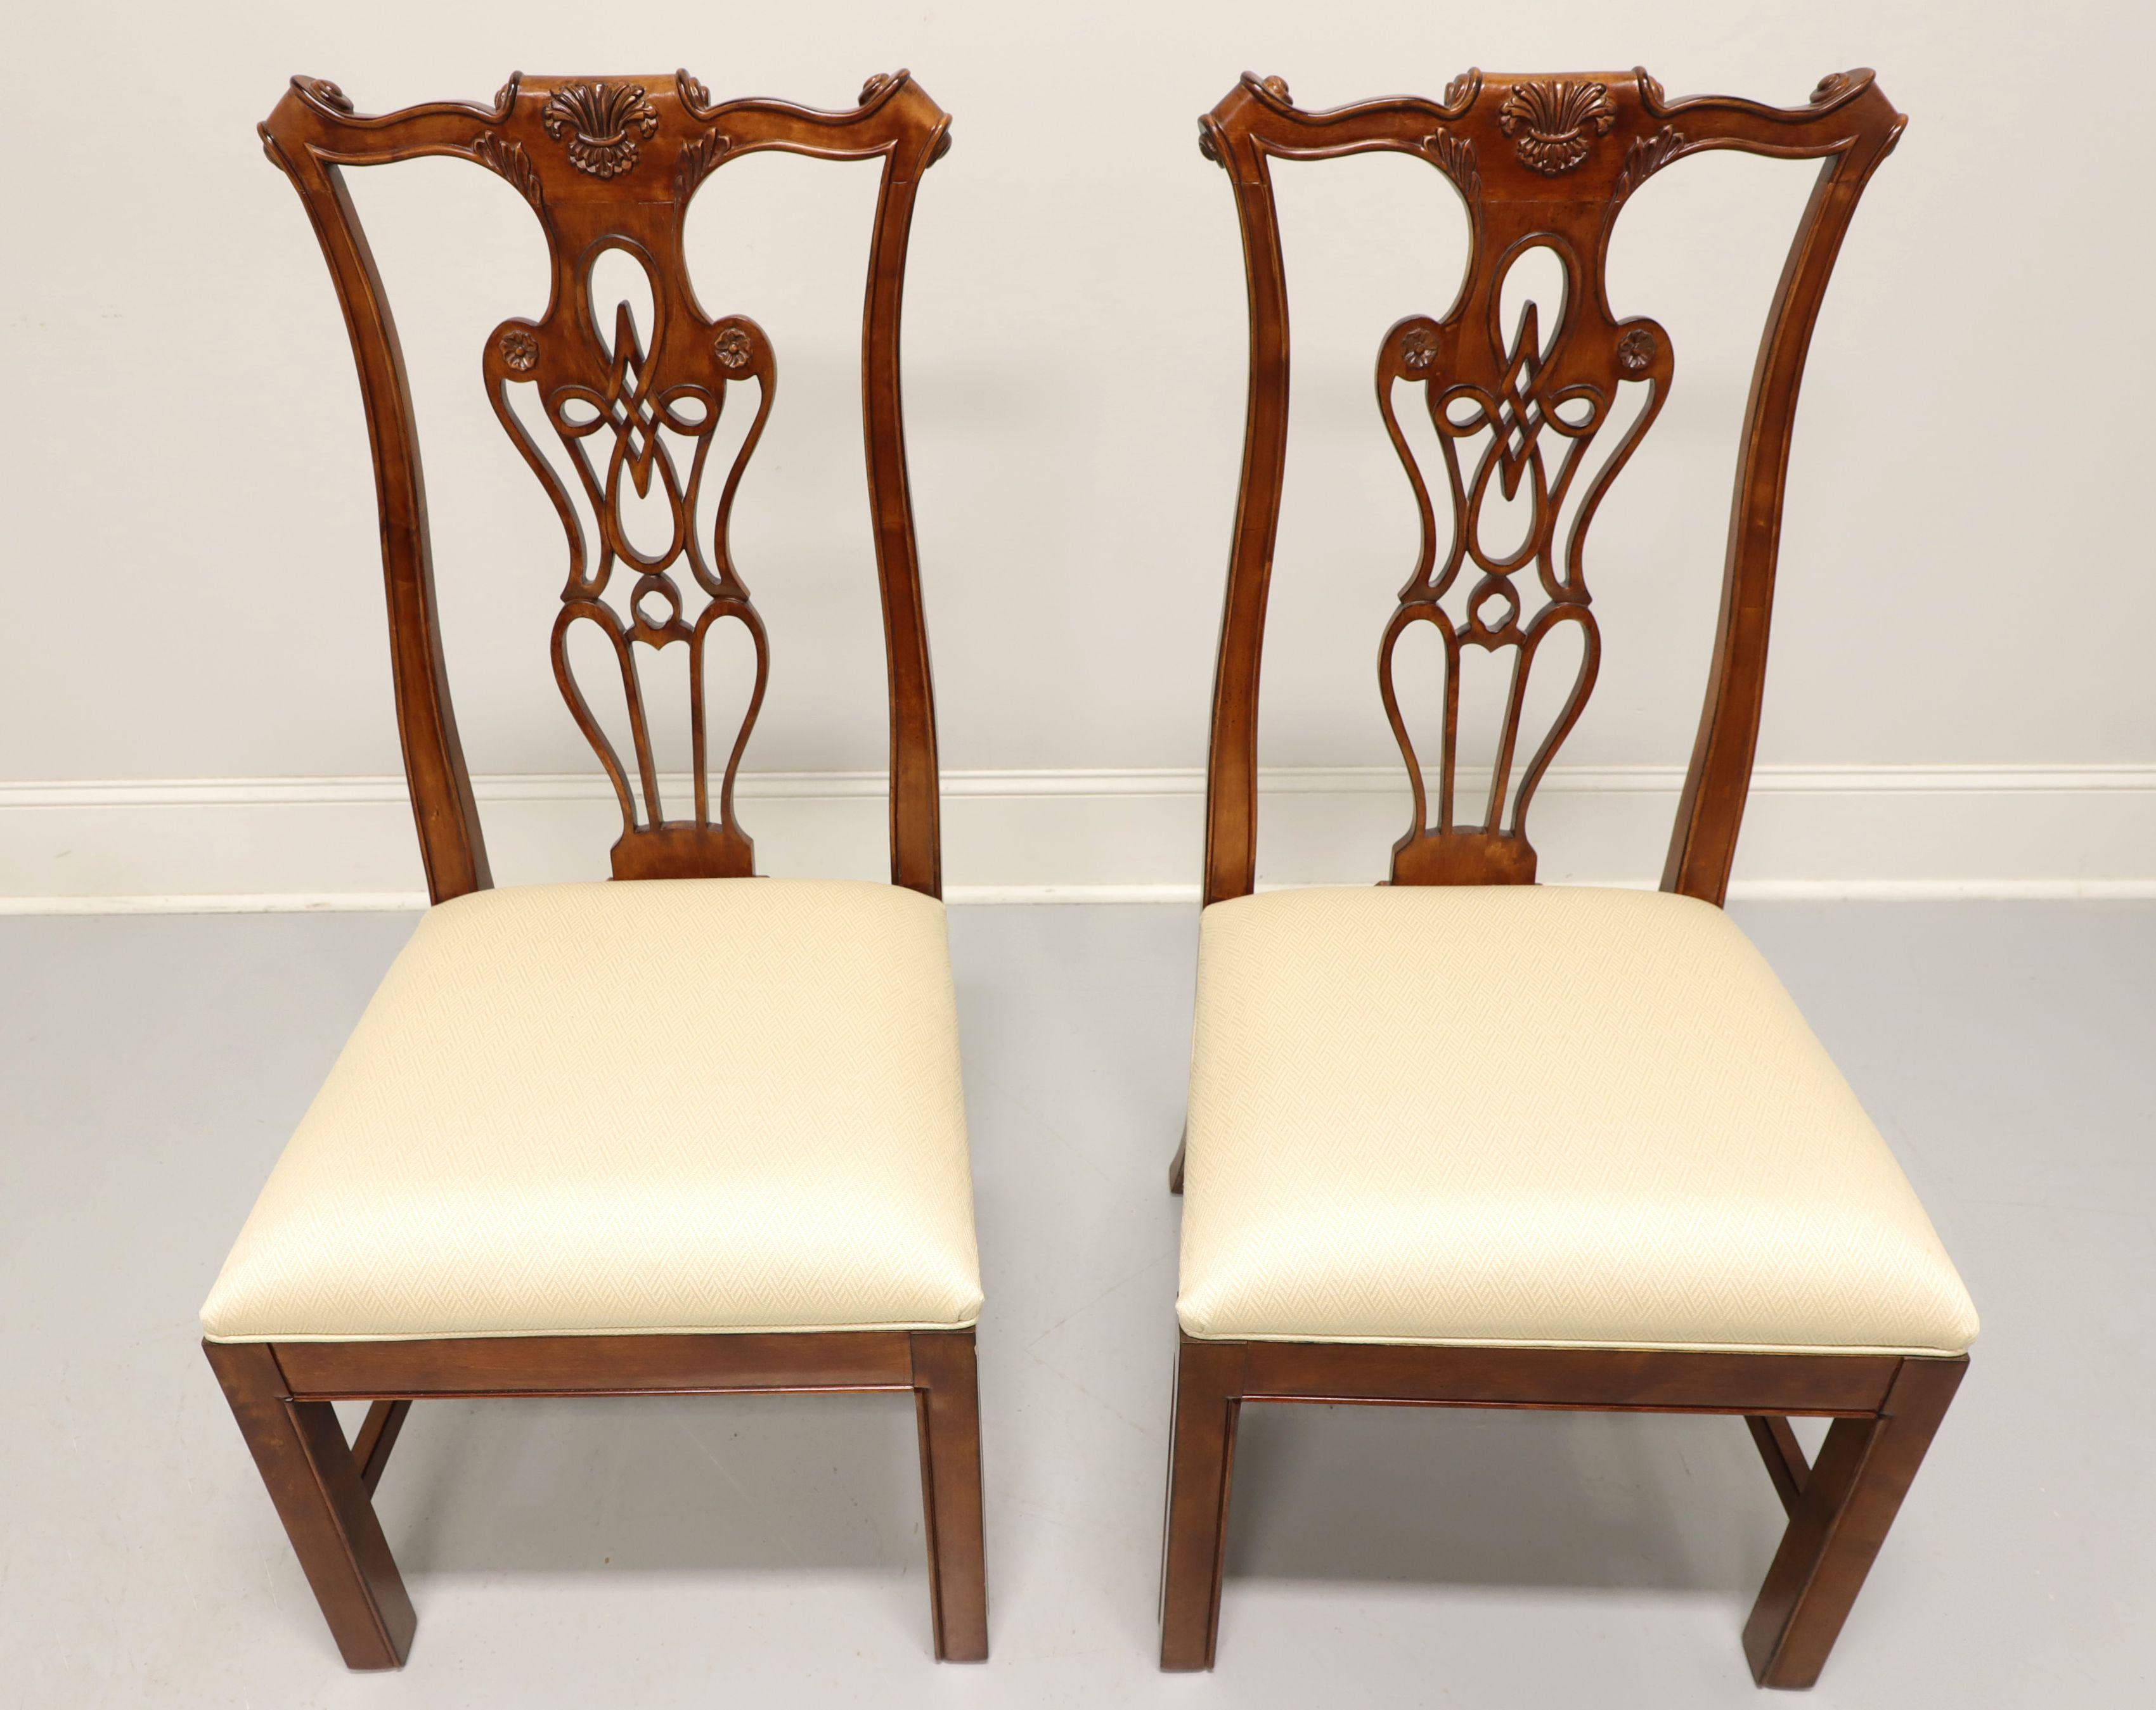 A pair of Chippendale style dining side chairs by Harden Furniture. Solid cherry wood with 